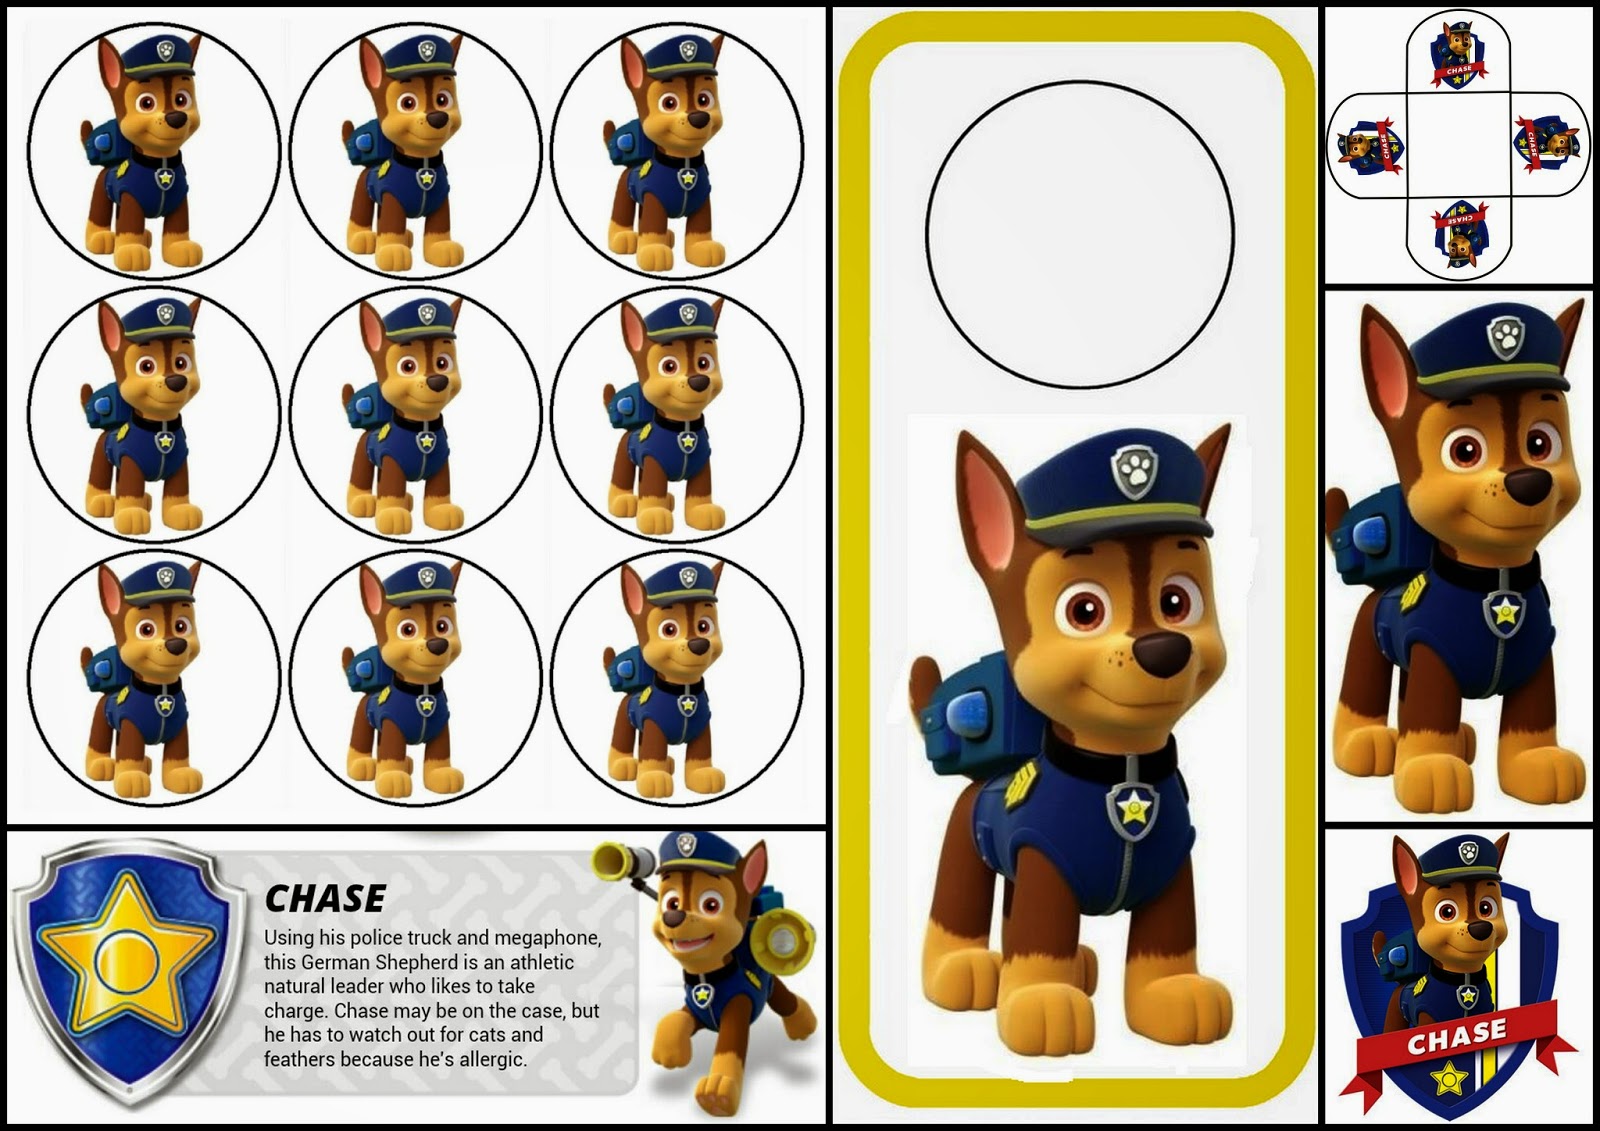 Paw Patrol: Free Printable Coloring Book. - Oh My Fiesta! in english